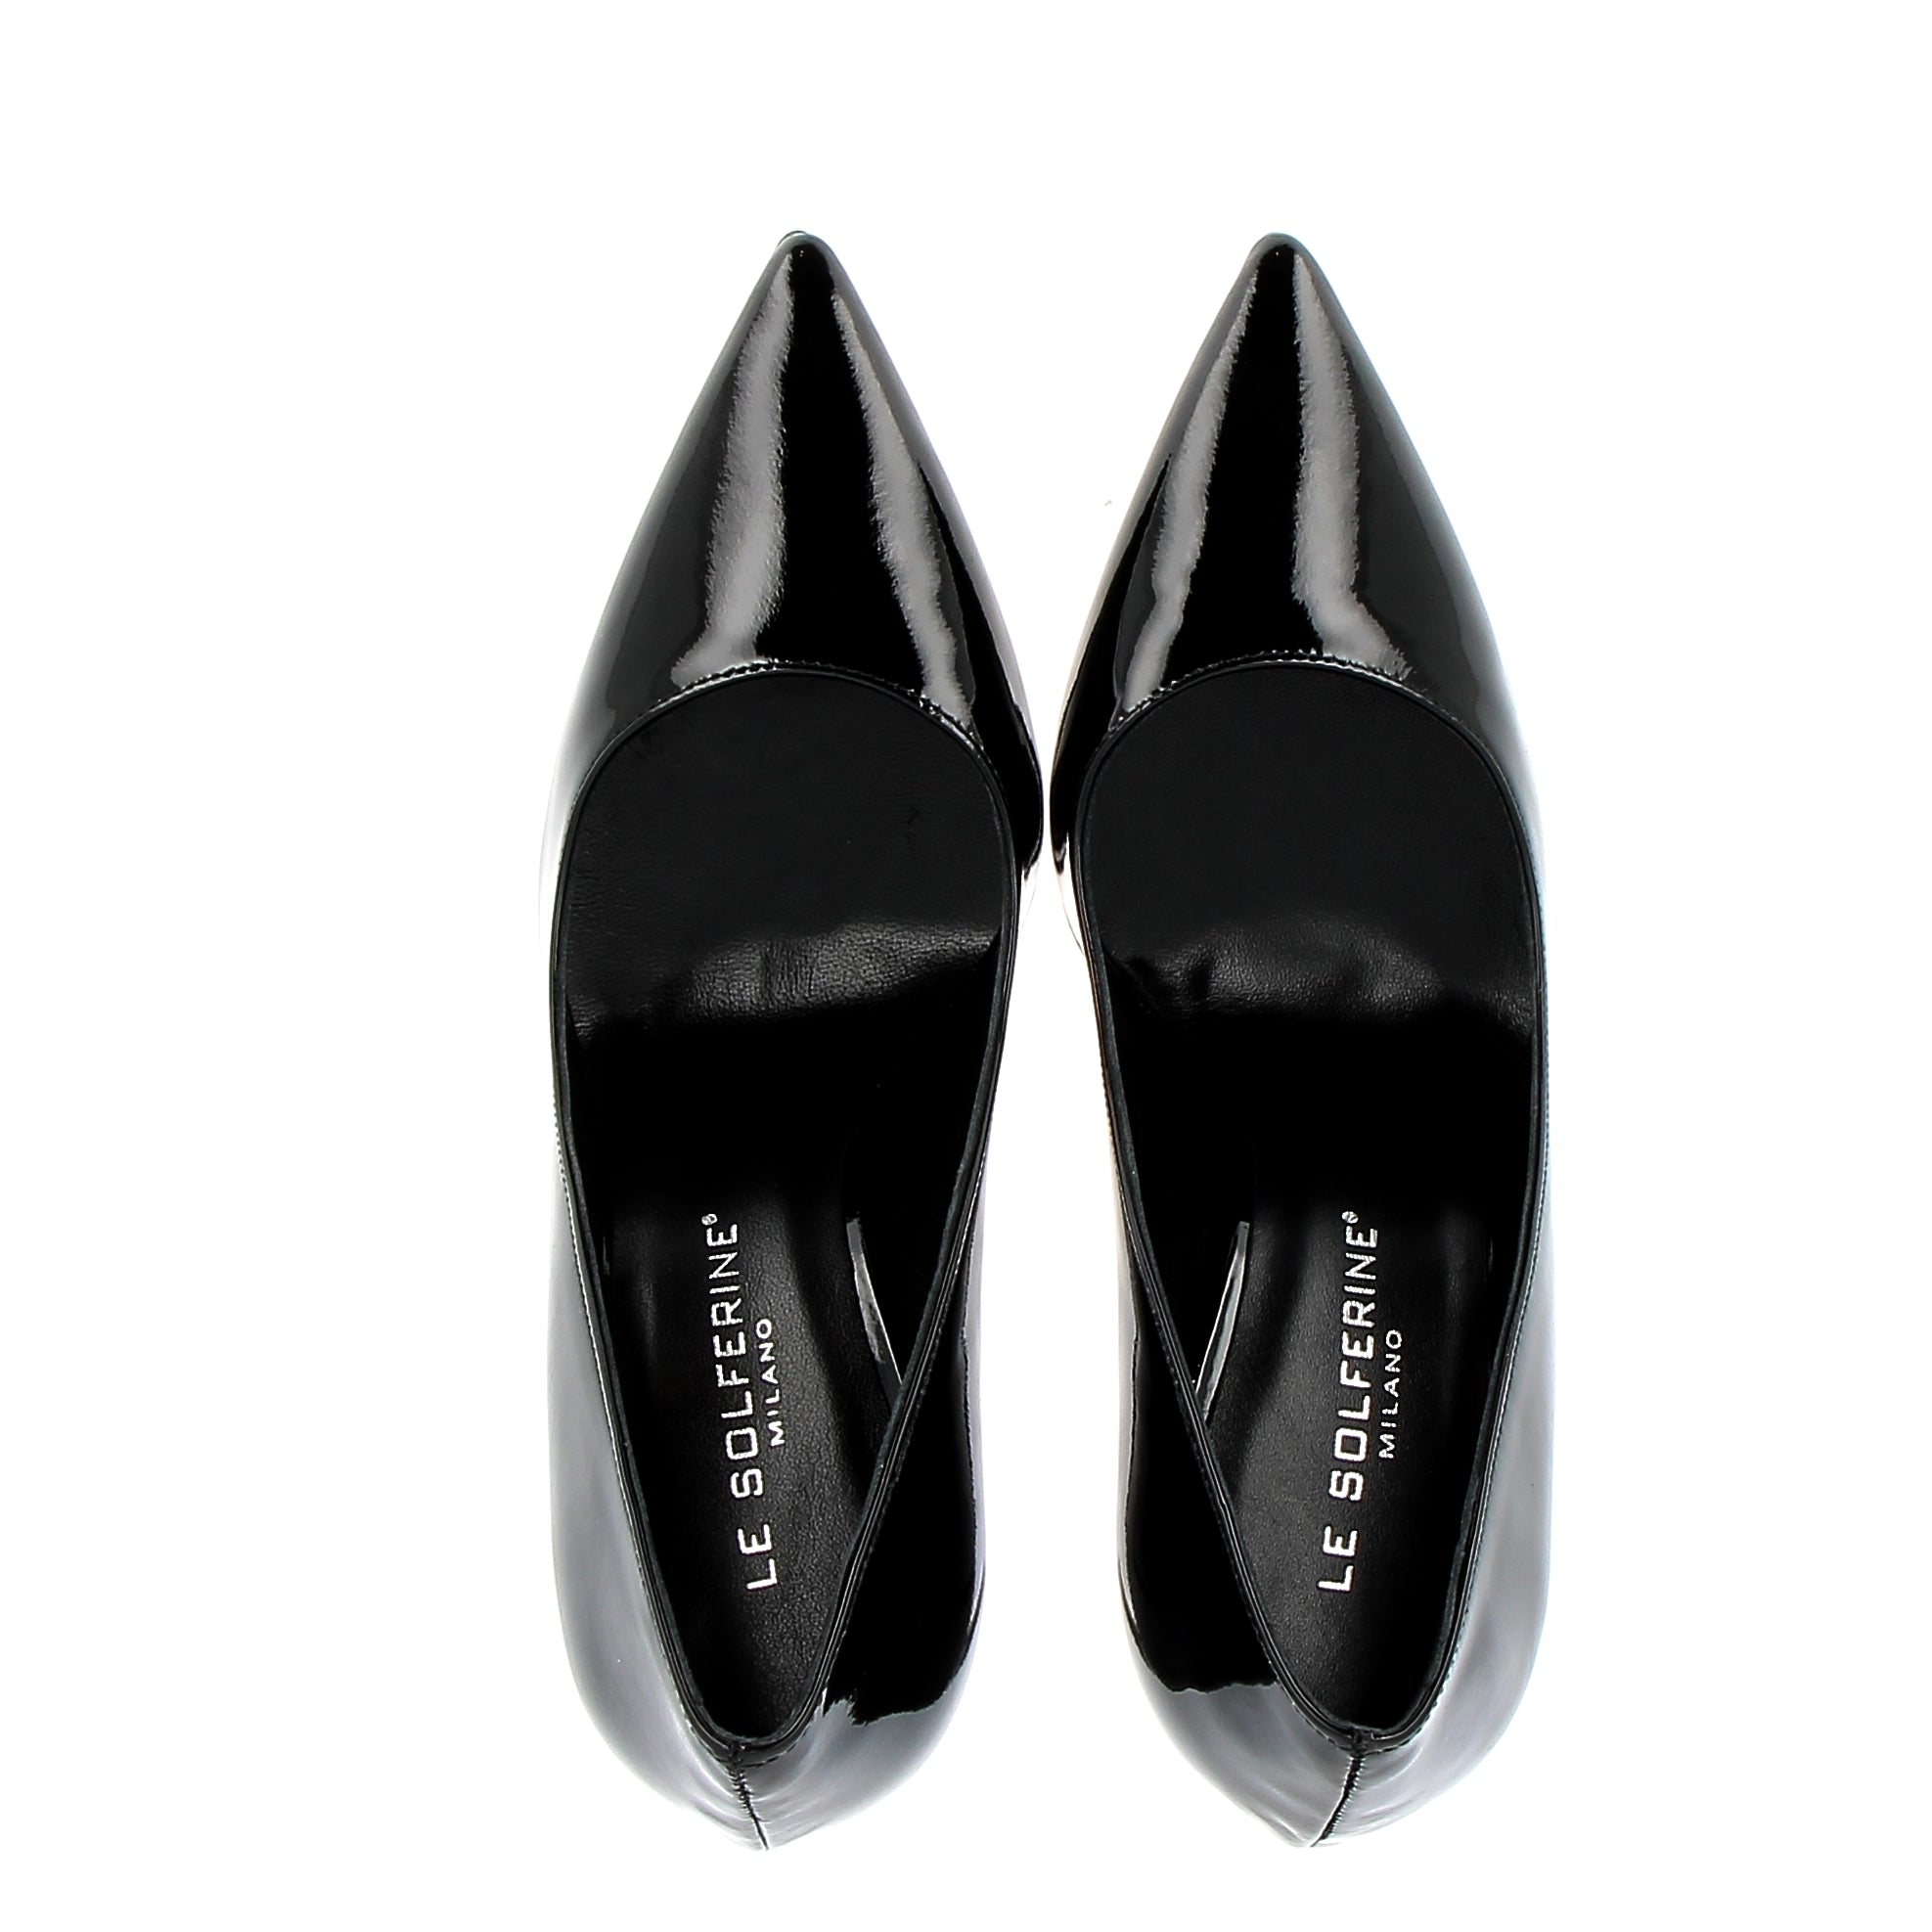 Decollete in high black patent leather